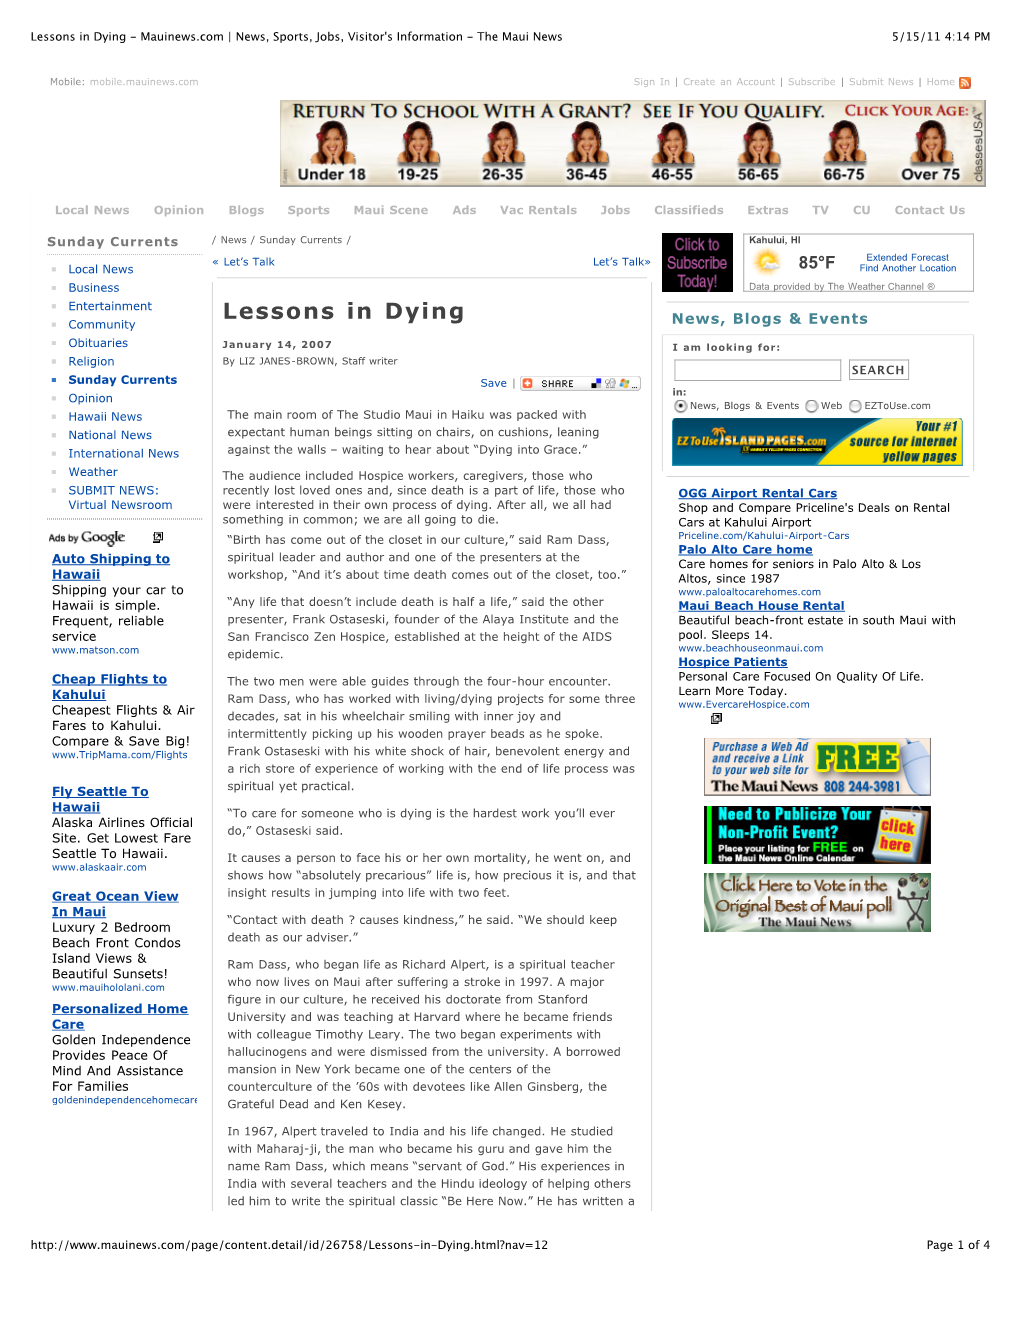 Lessons in Dying - Mauinews.Com | News, Sports, Jobs, Visitor's Information - the Maui News 5/15/11 4:14 PM